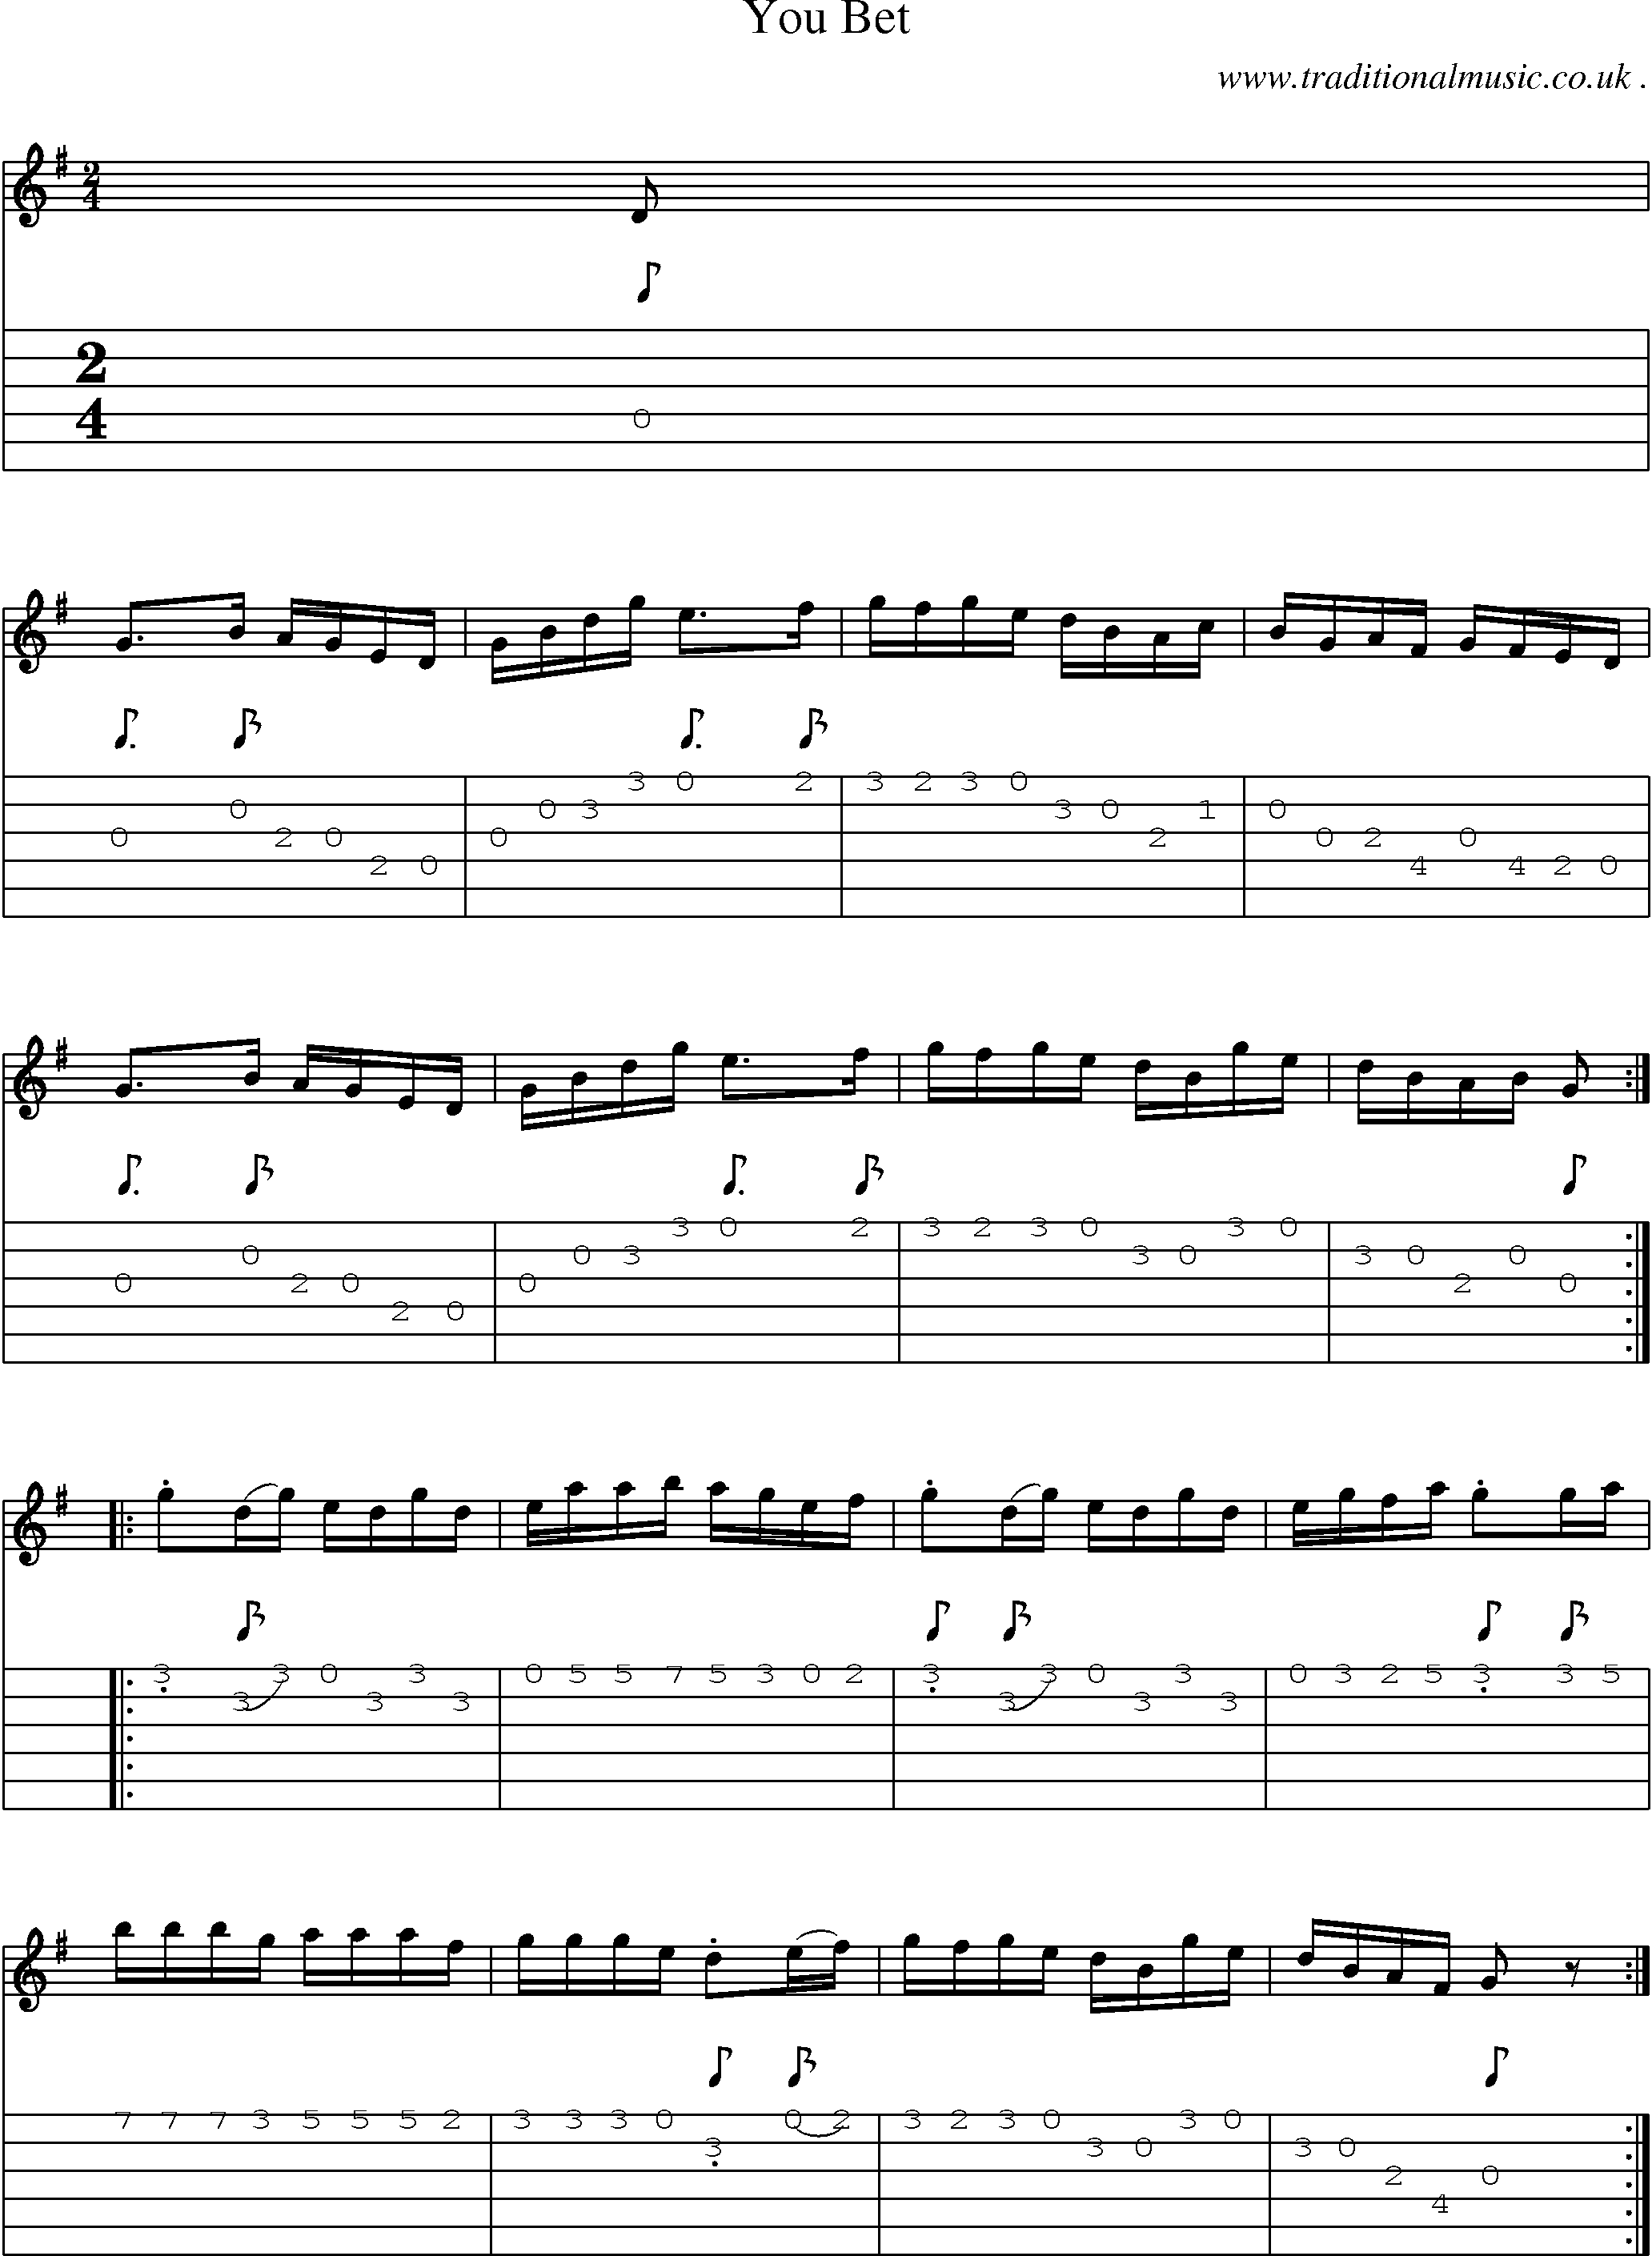 Sheet-Music and Guitar Tabs for You Bet